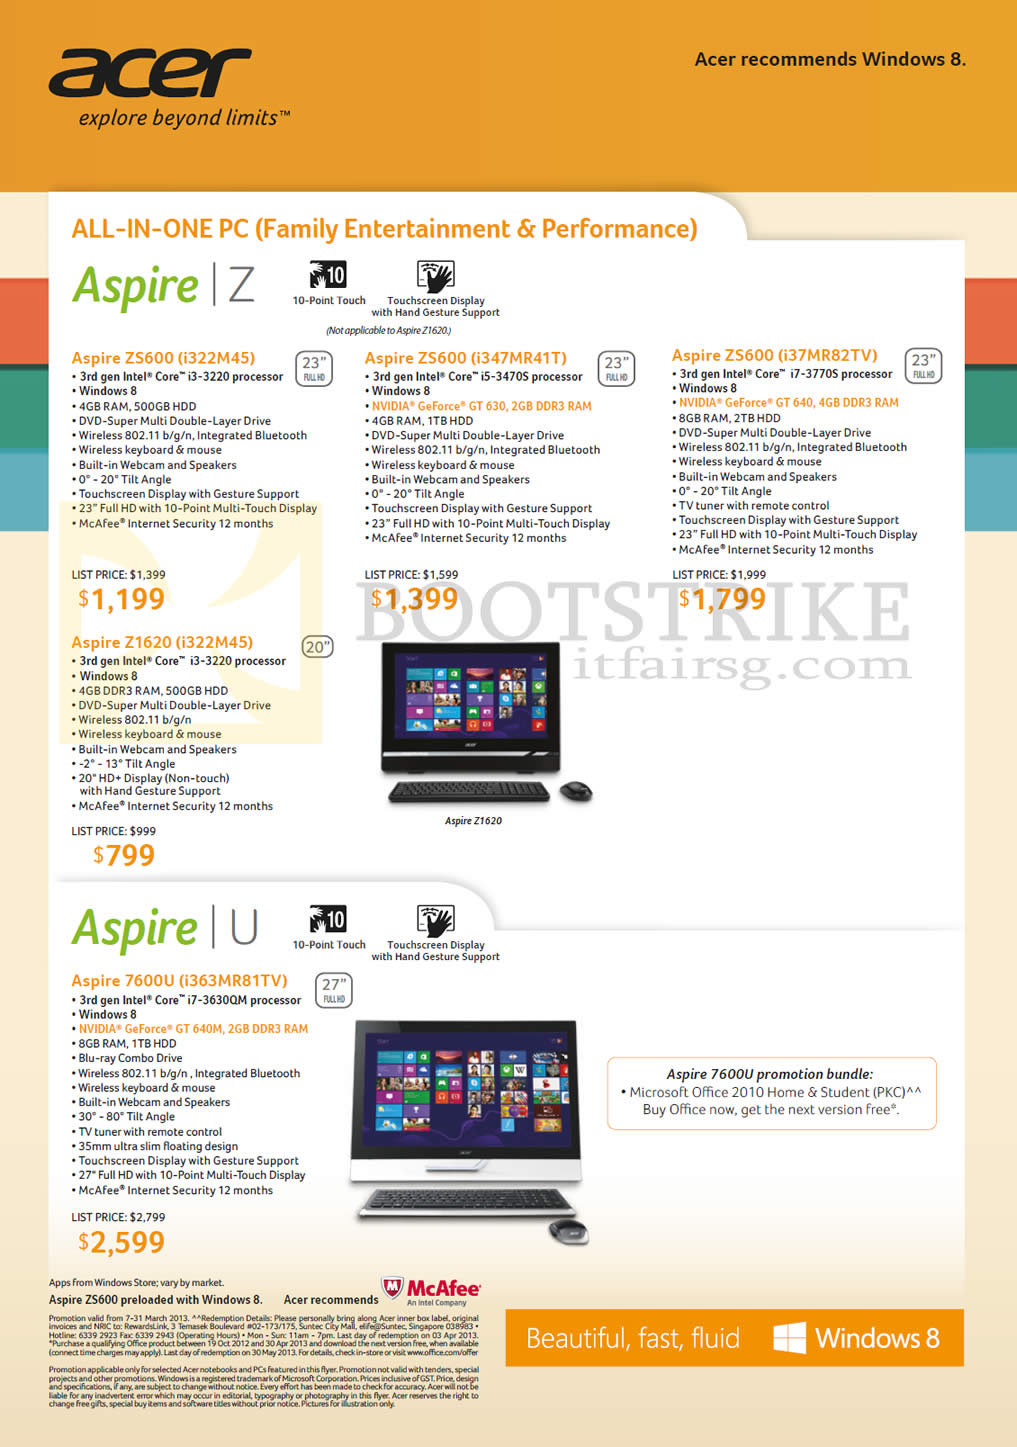 IT SHOW 2013 price list image brochure of Acer AIO Desktop PCs Aspire ZS600 I322M45, I347MR41T, I37MR82TV, I322M45, 7600U I363MR81TV